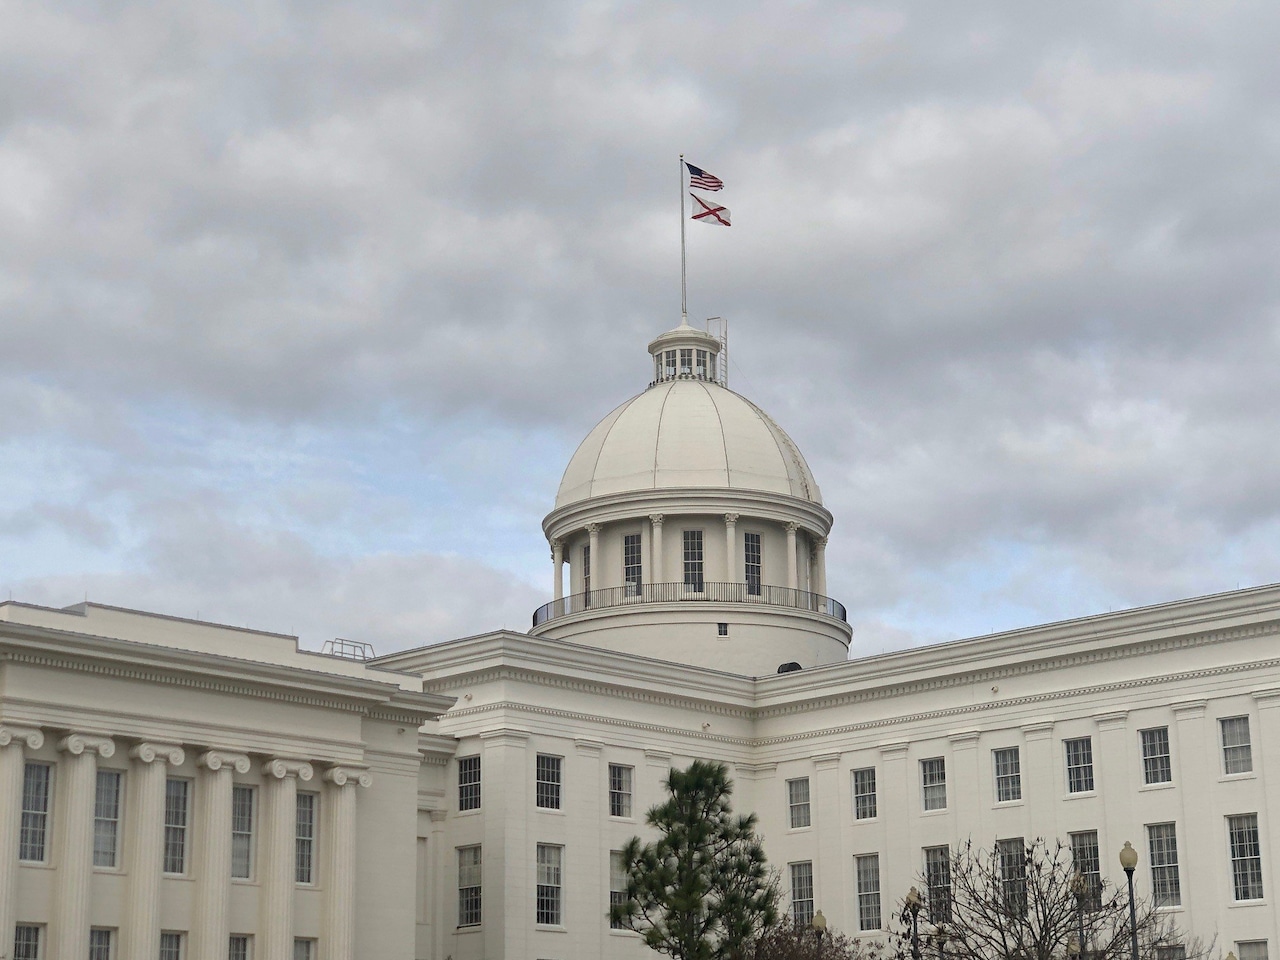 Alabama is the 3rd worst state for mental health, Forbes Advisor says [Video]